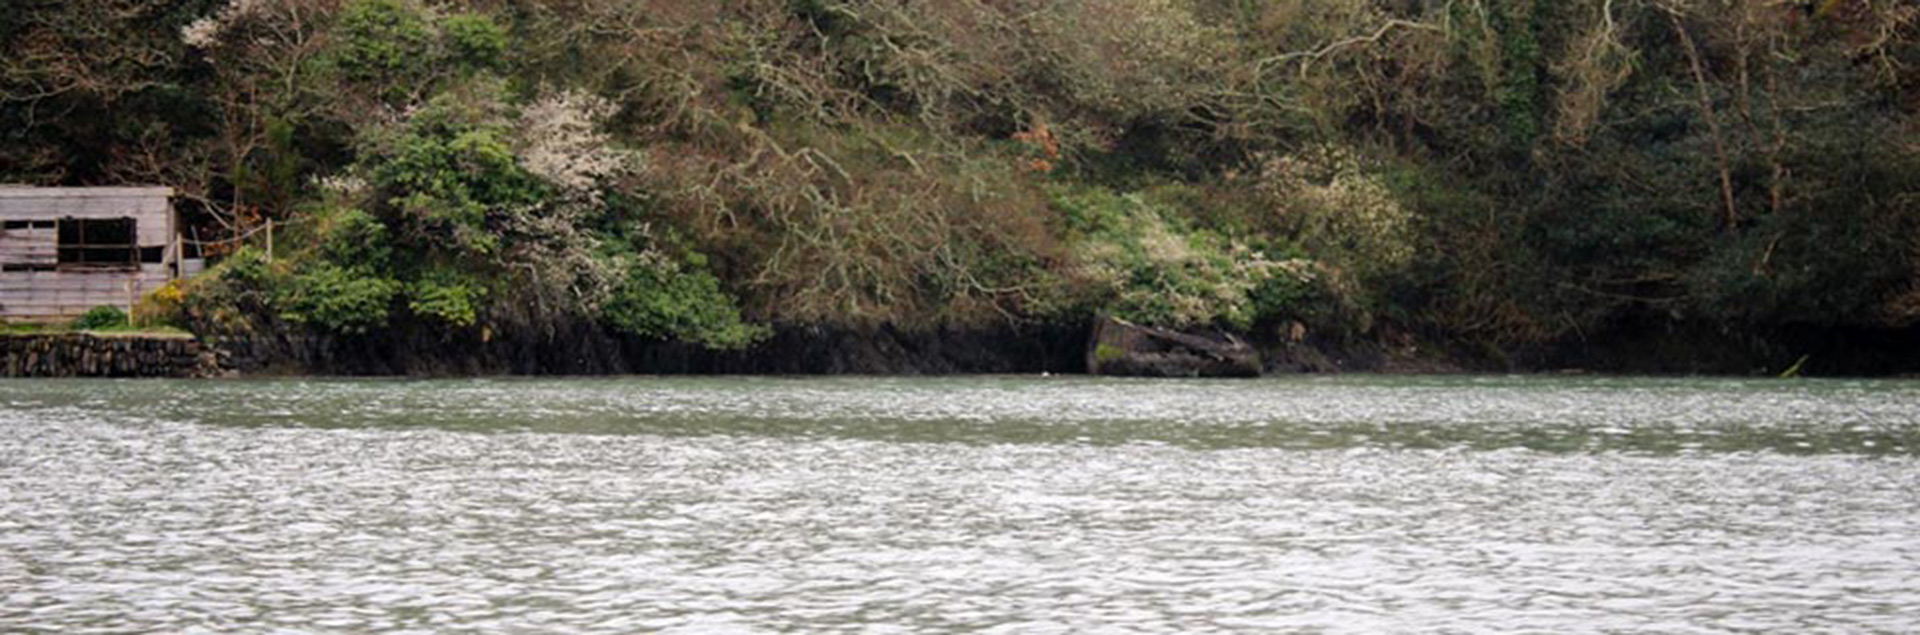 Things to do on the Helford River